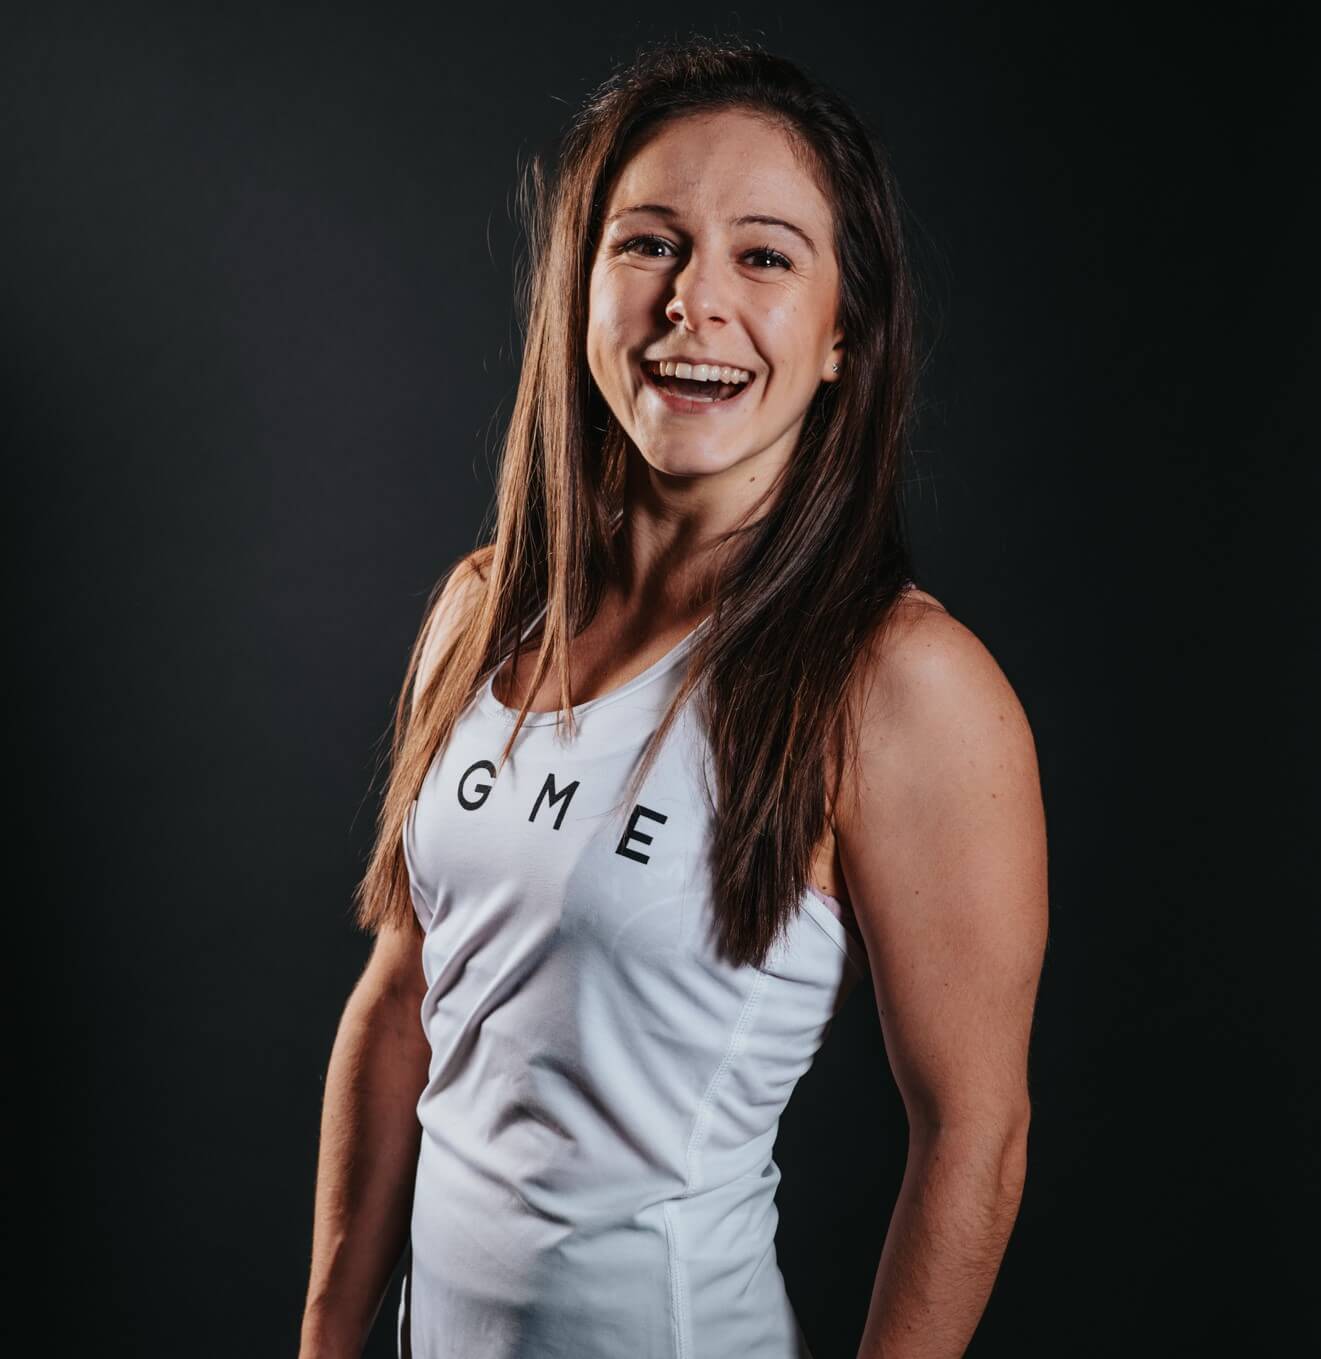 Ellie - Instructor at Digme Fitness